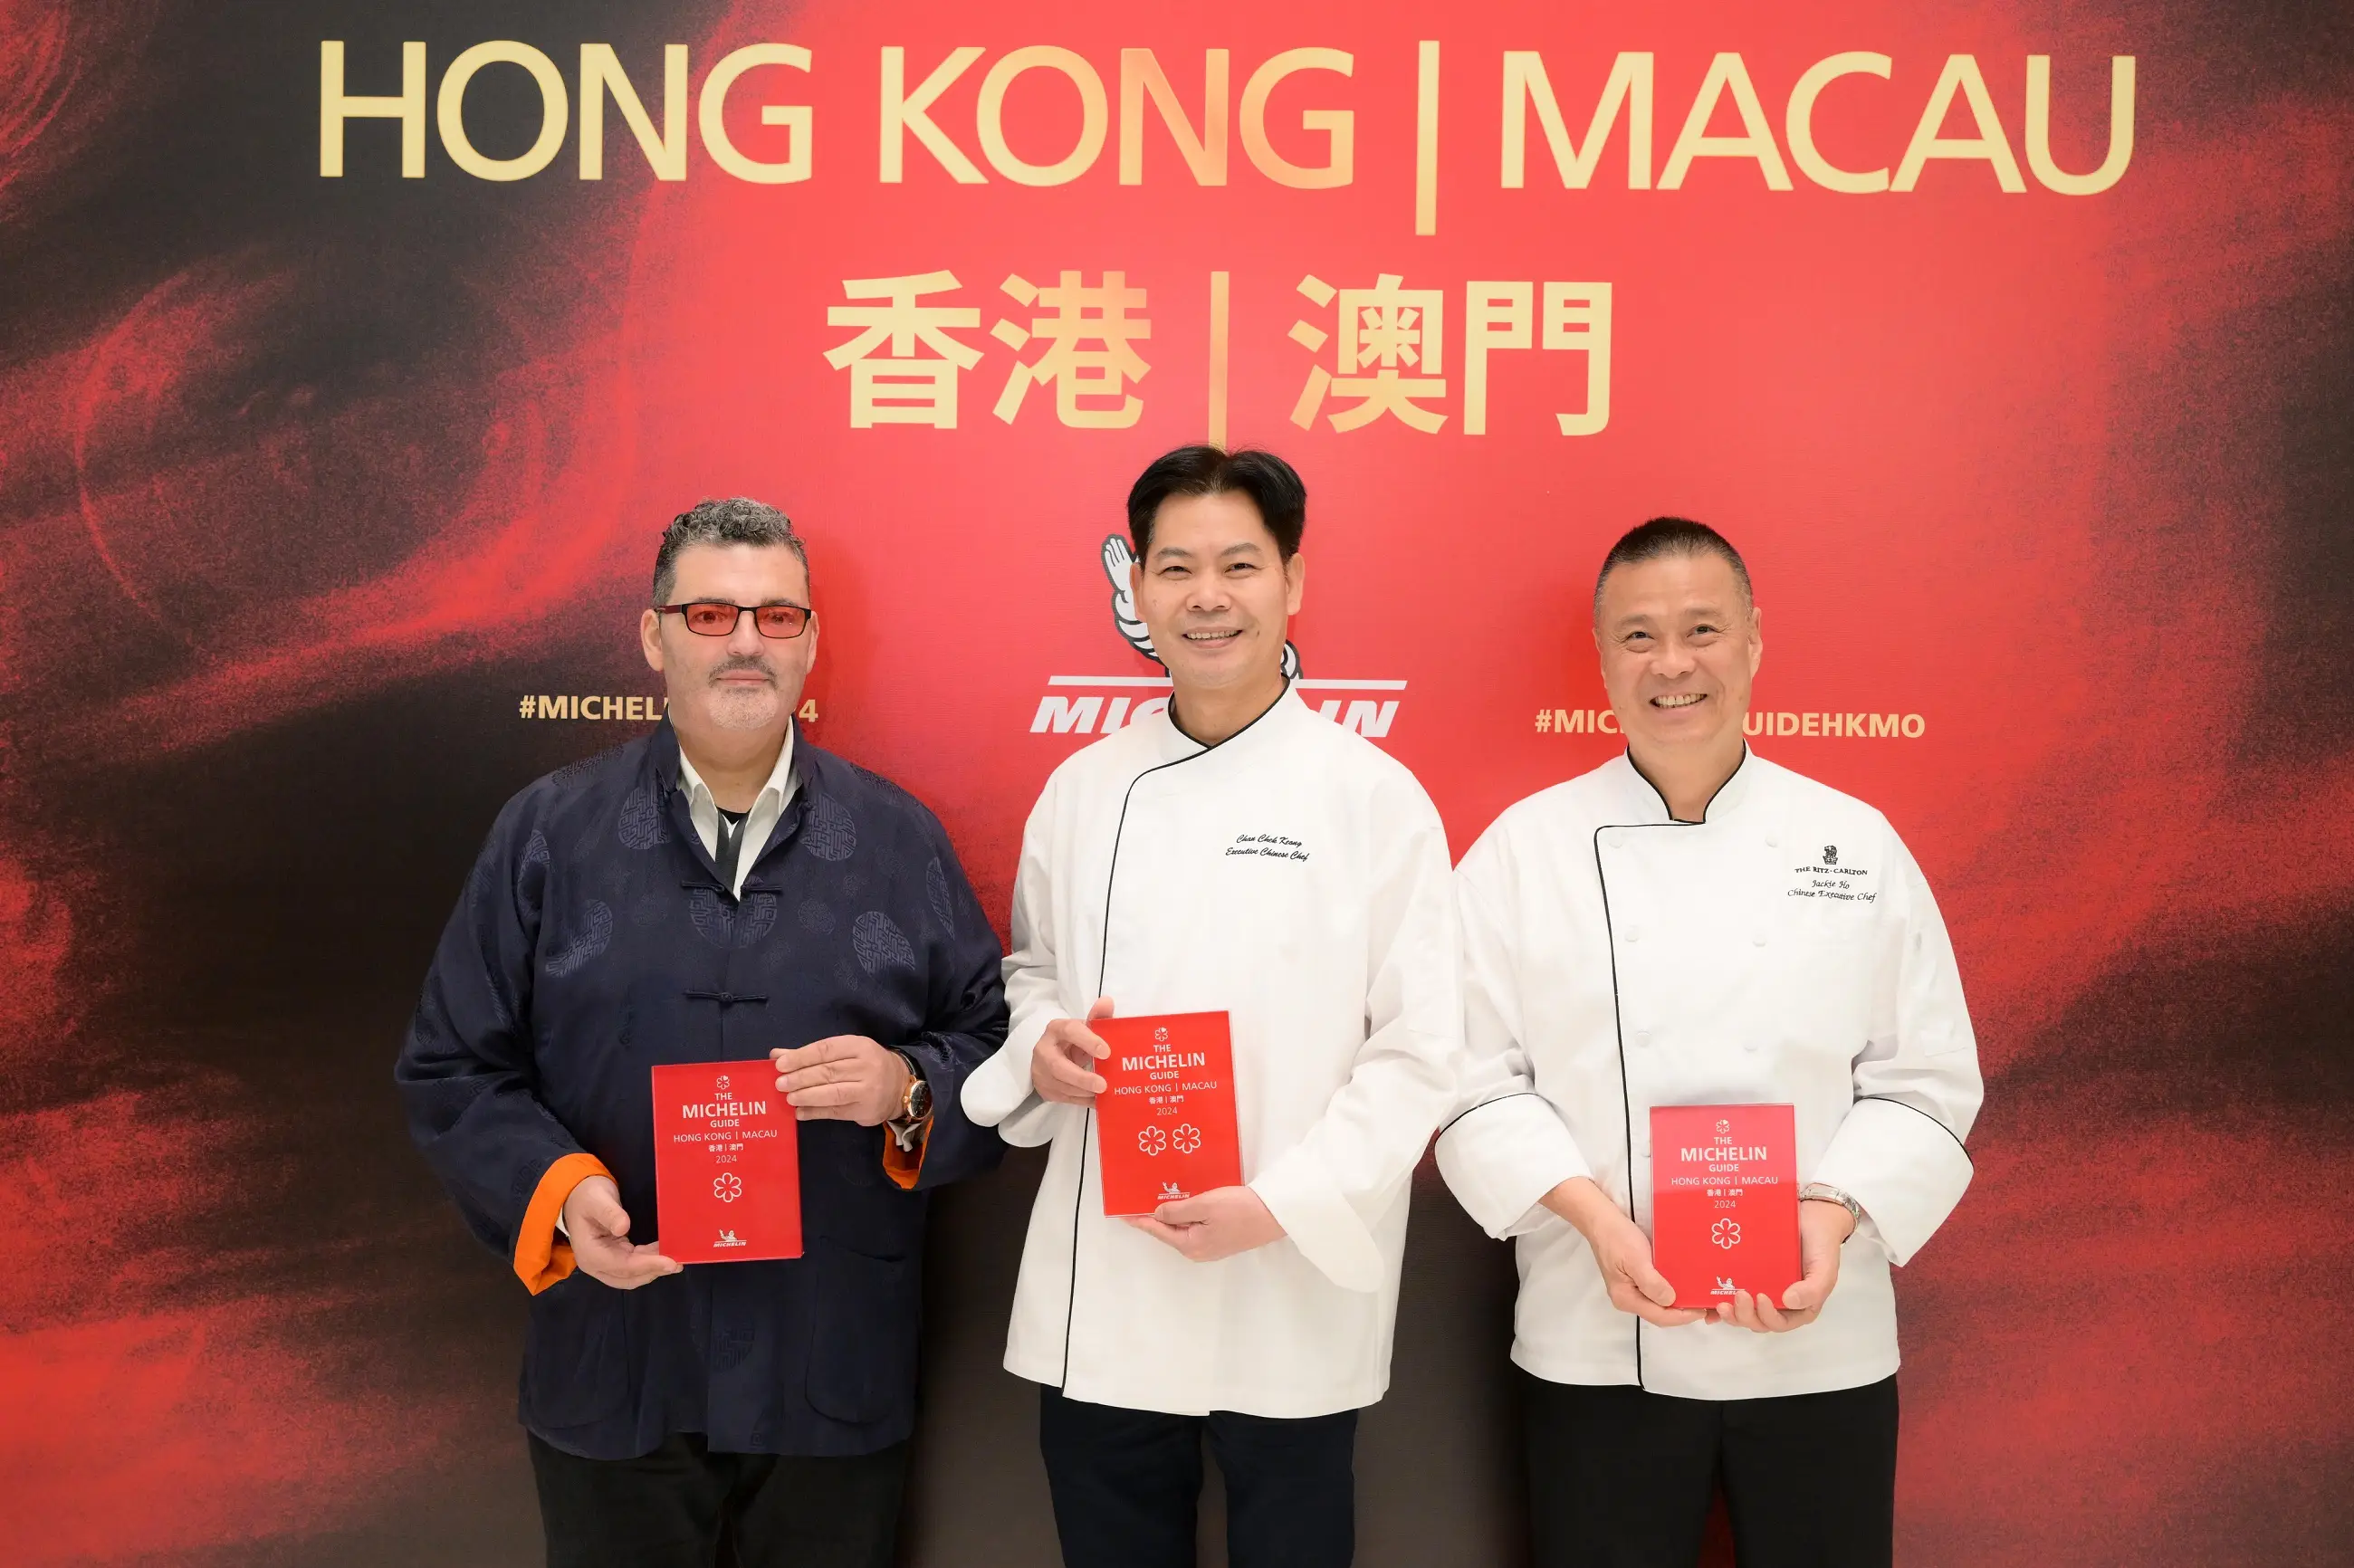 The three chefs pose for a photo together